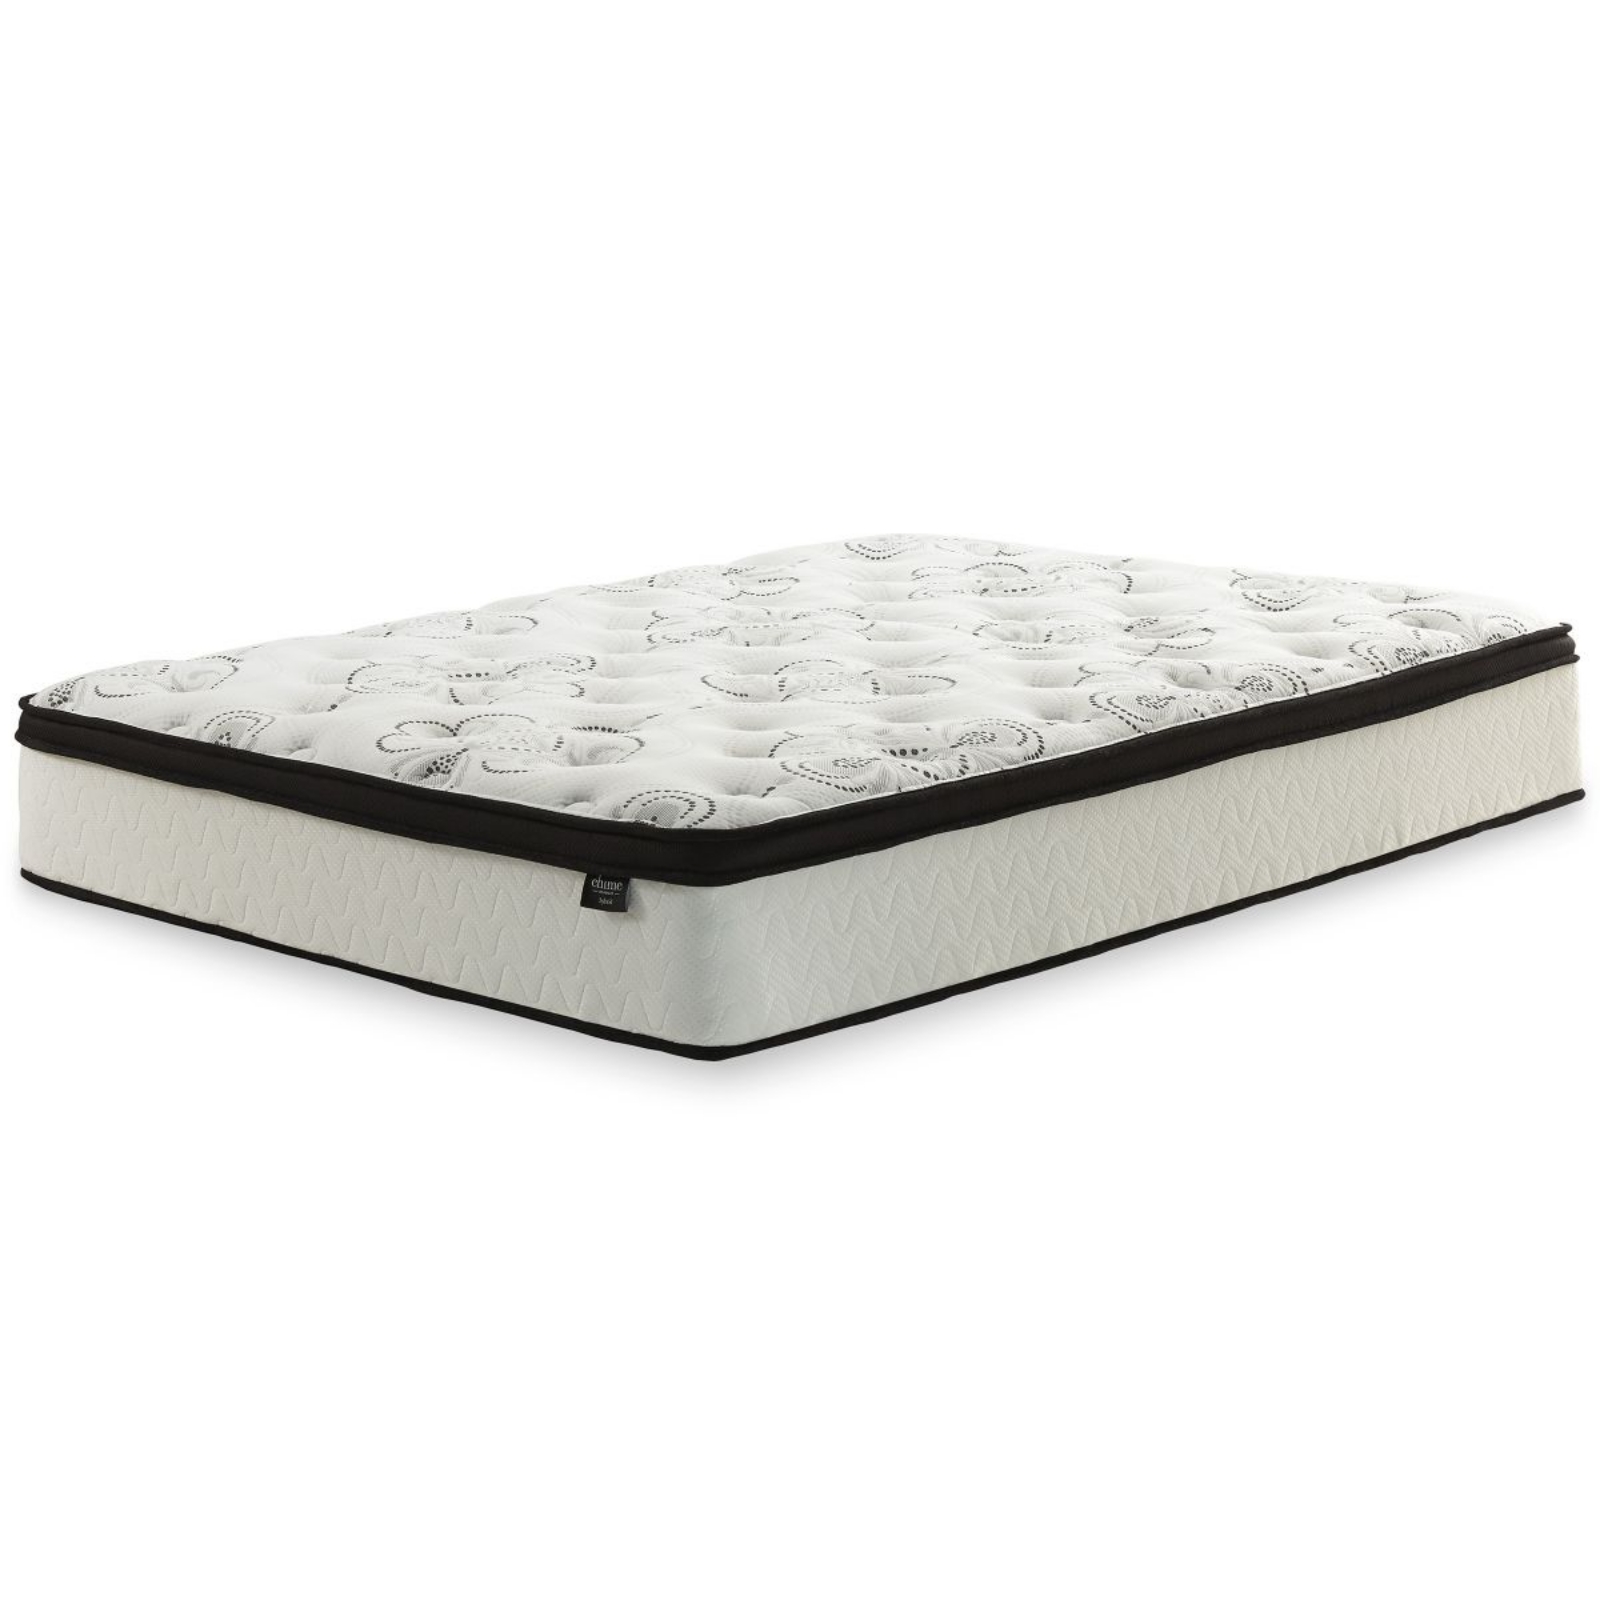 Picture of Chime 12 Inch Hybrid Twin Mattress